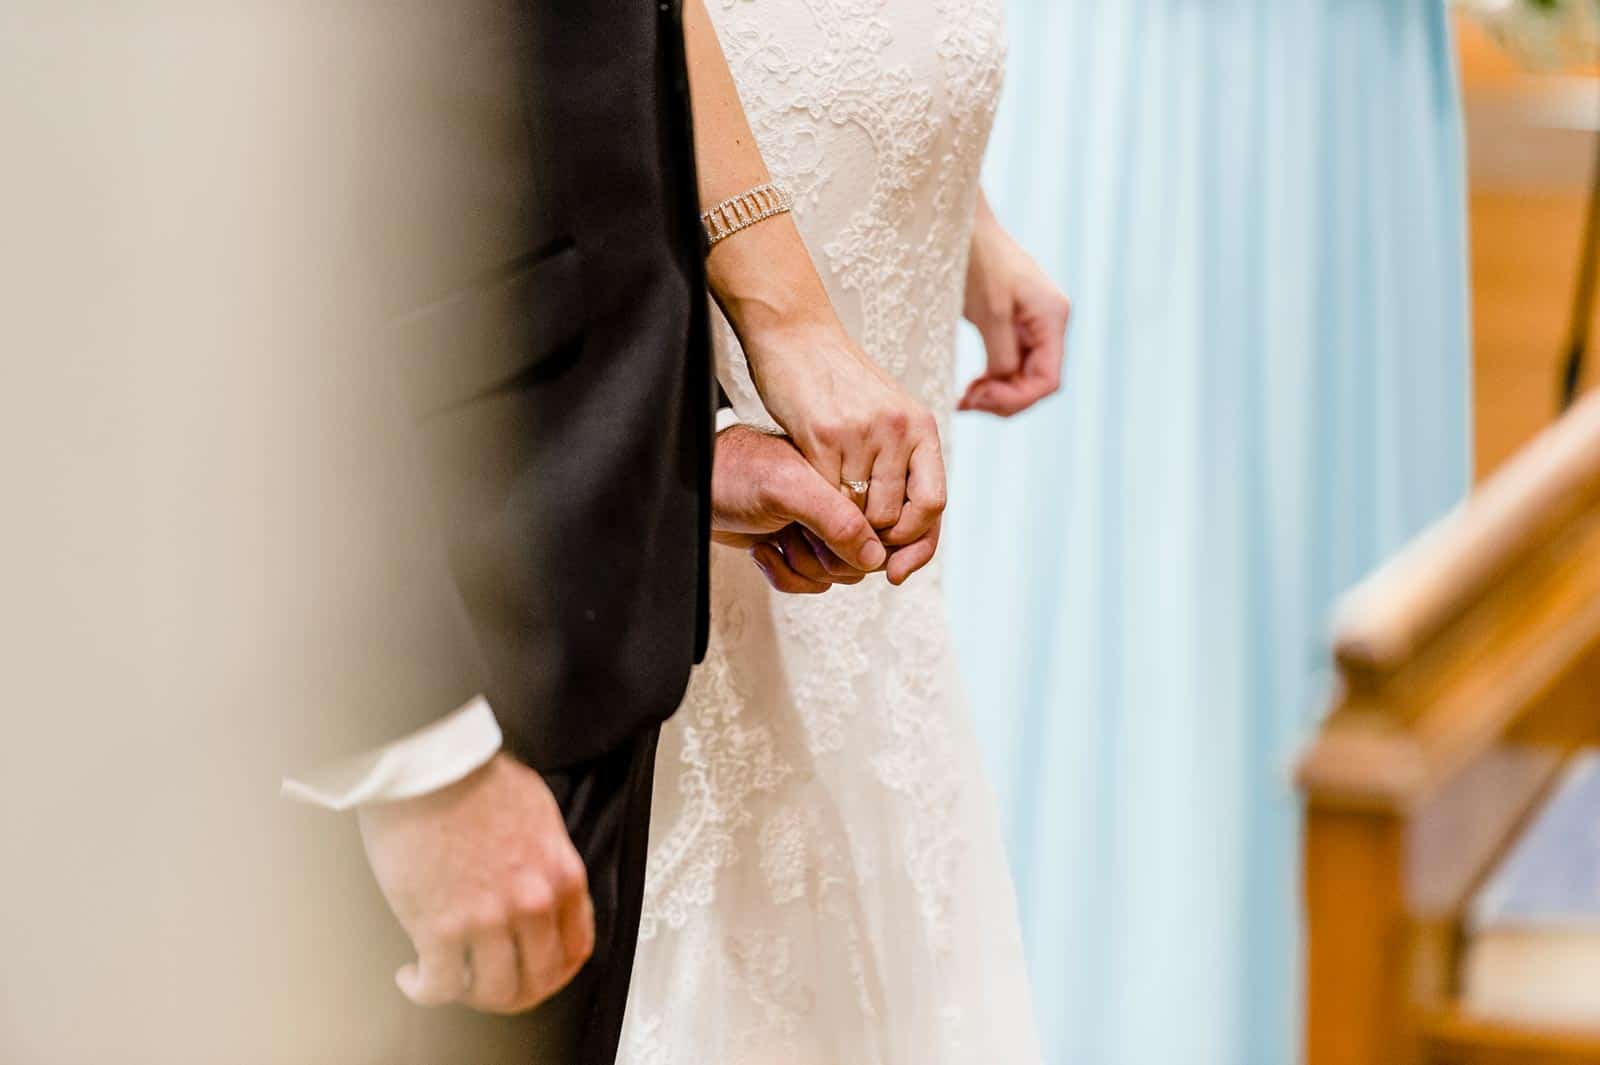 Holding hands during their wedding ceremony